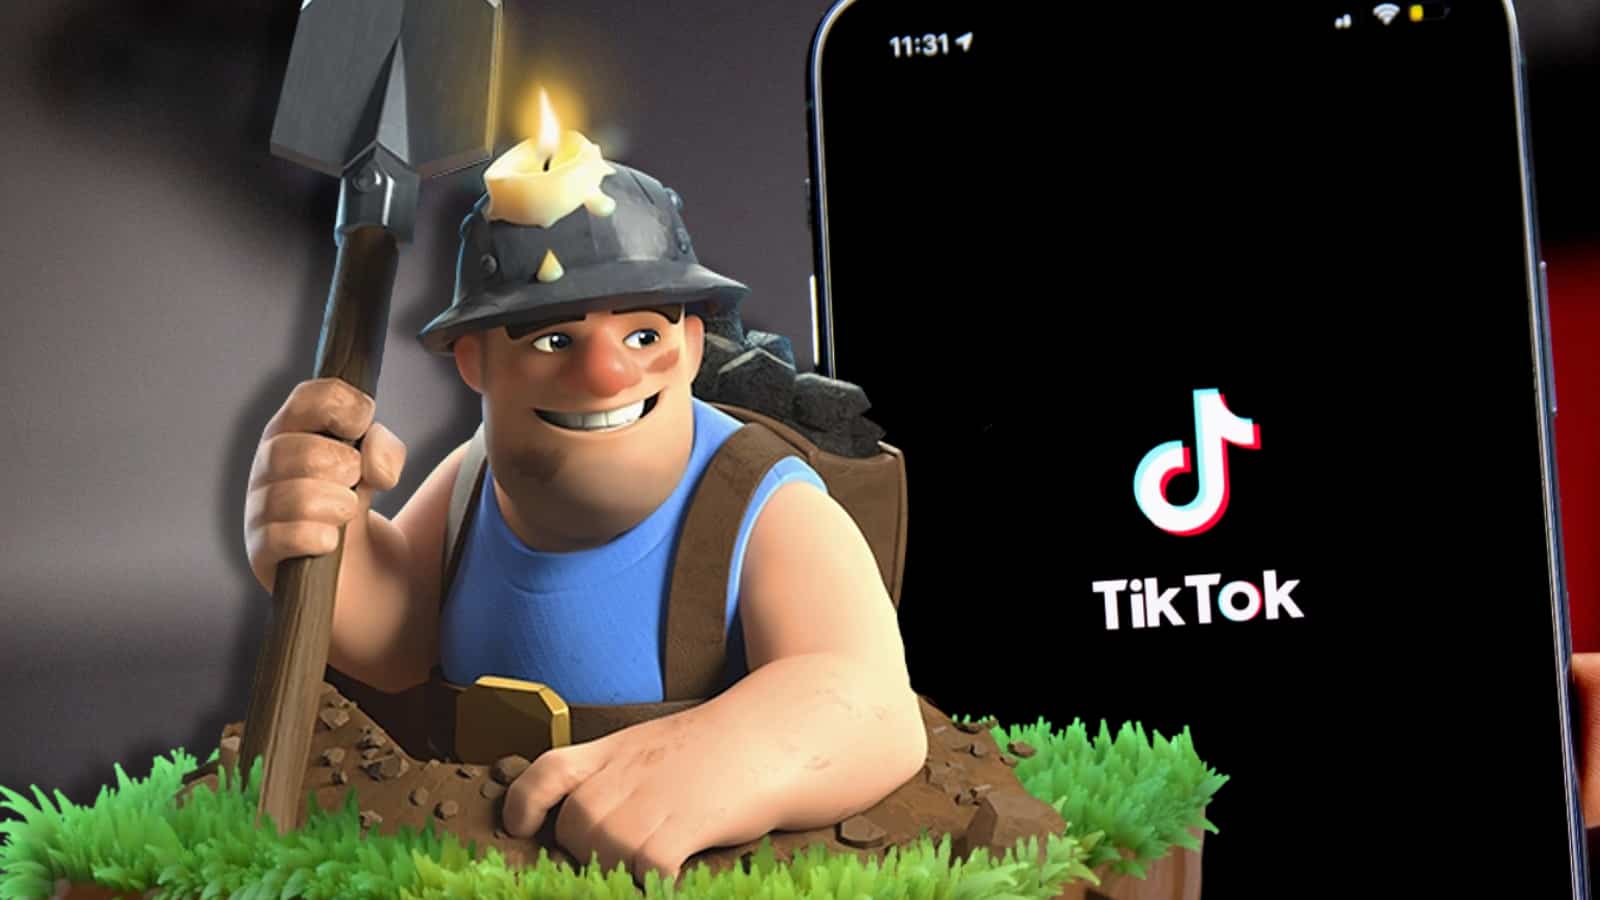 Clash of Clans character Miner next to TikTok logo